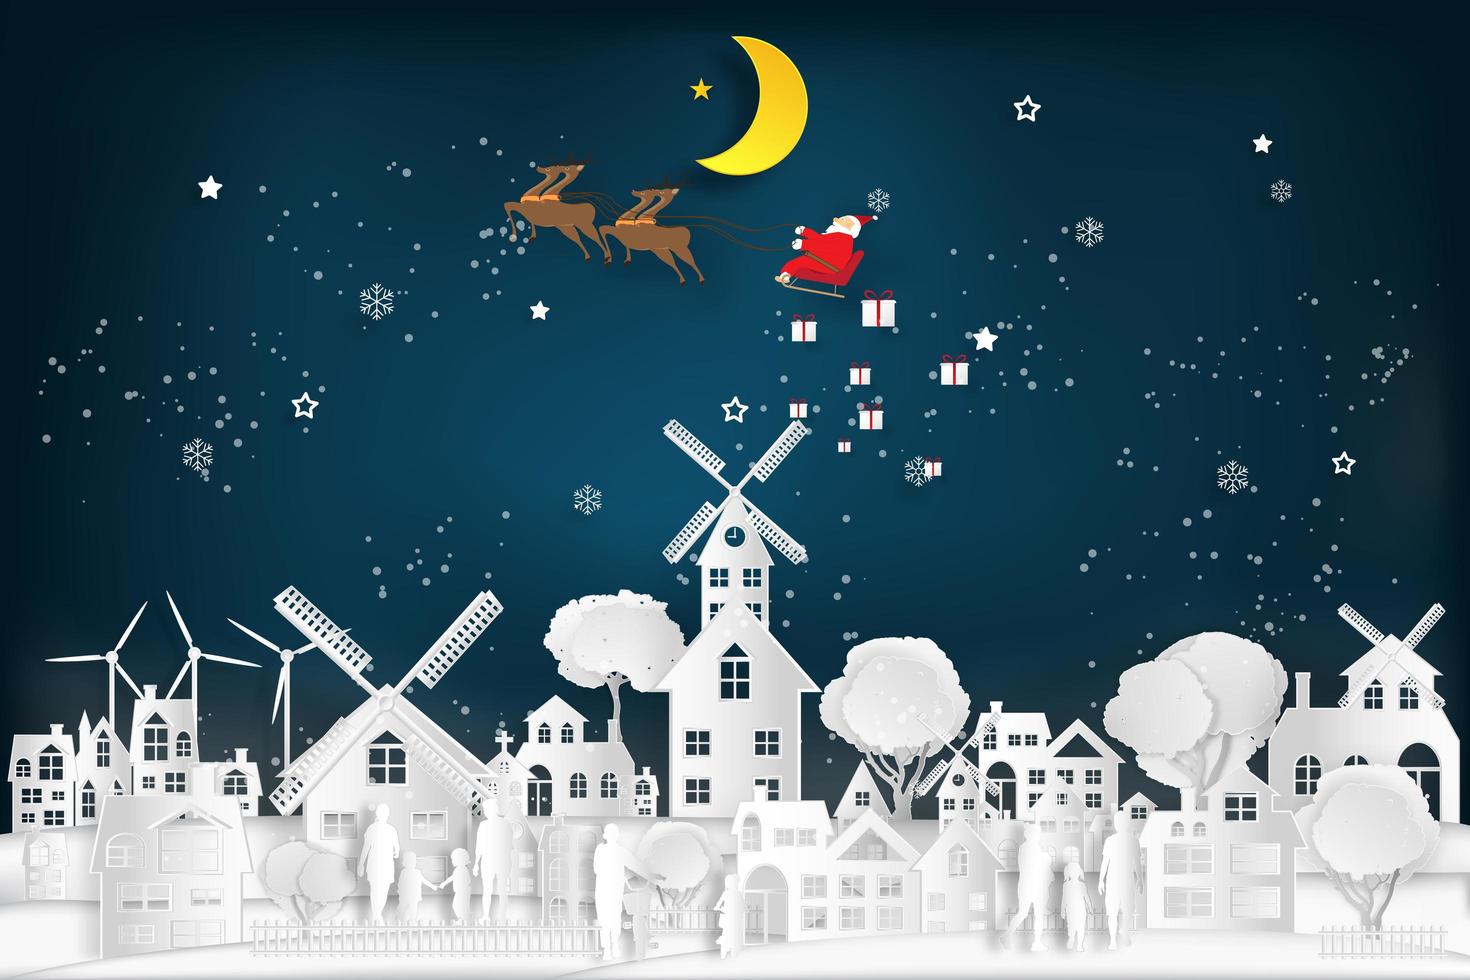 Paper Cut Santa and Sleigh Flying Over Town Scene vector